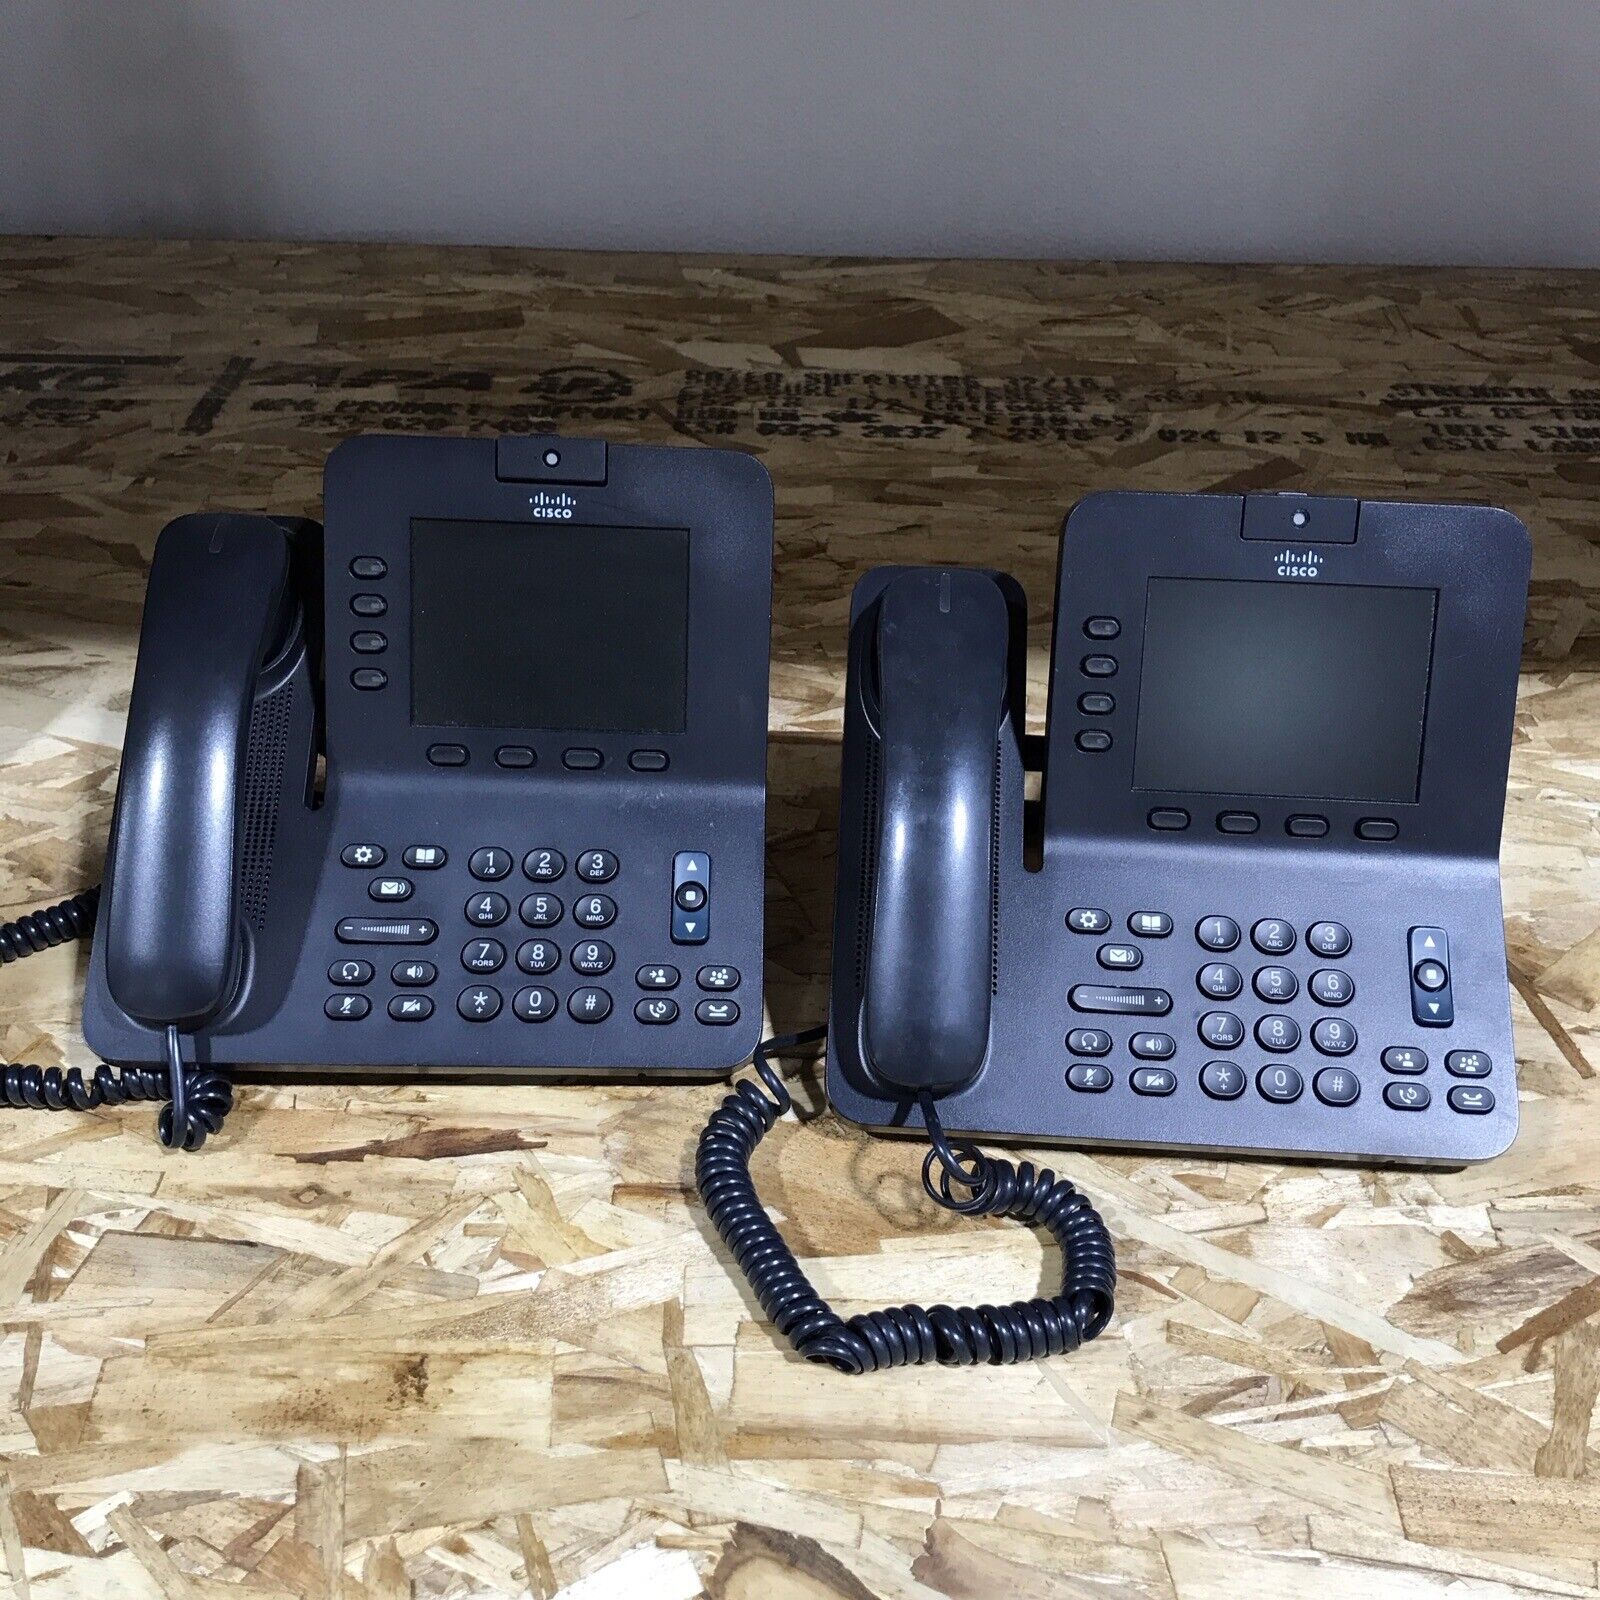 Lot of 2 Cisco CP-8945-K9 IP VOIP Video Conference Phone w/ Stand Handset Cable